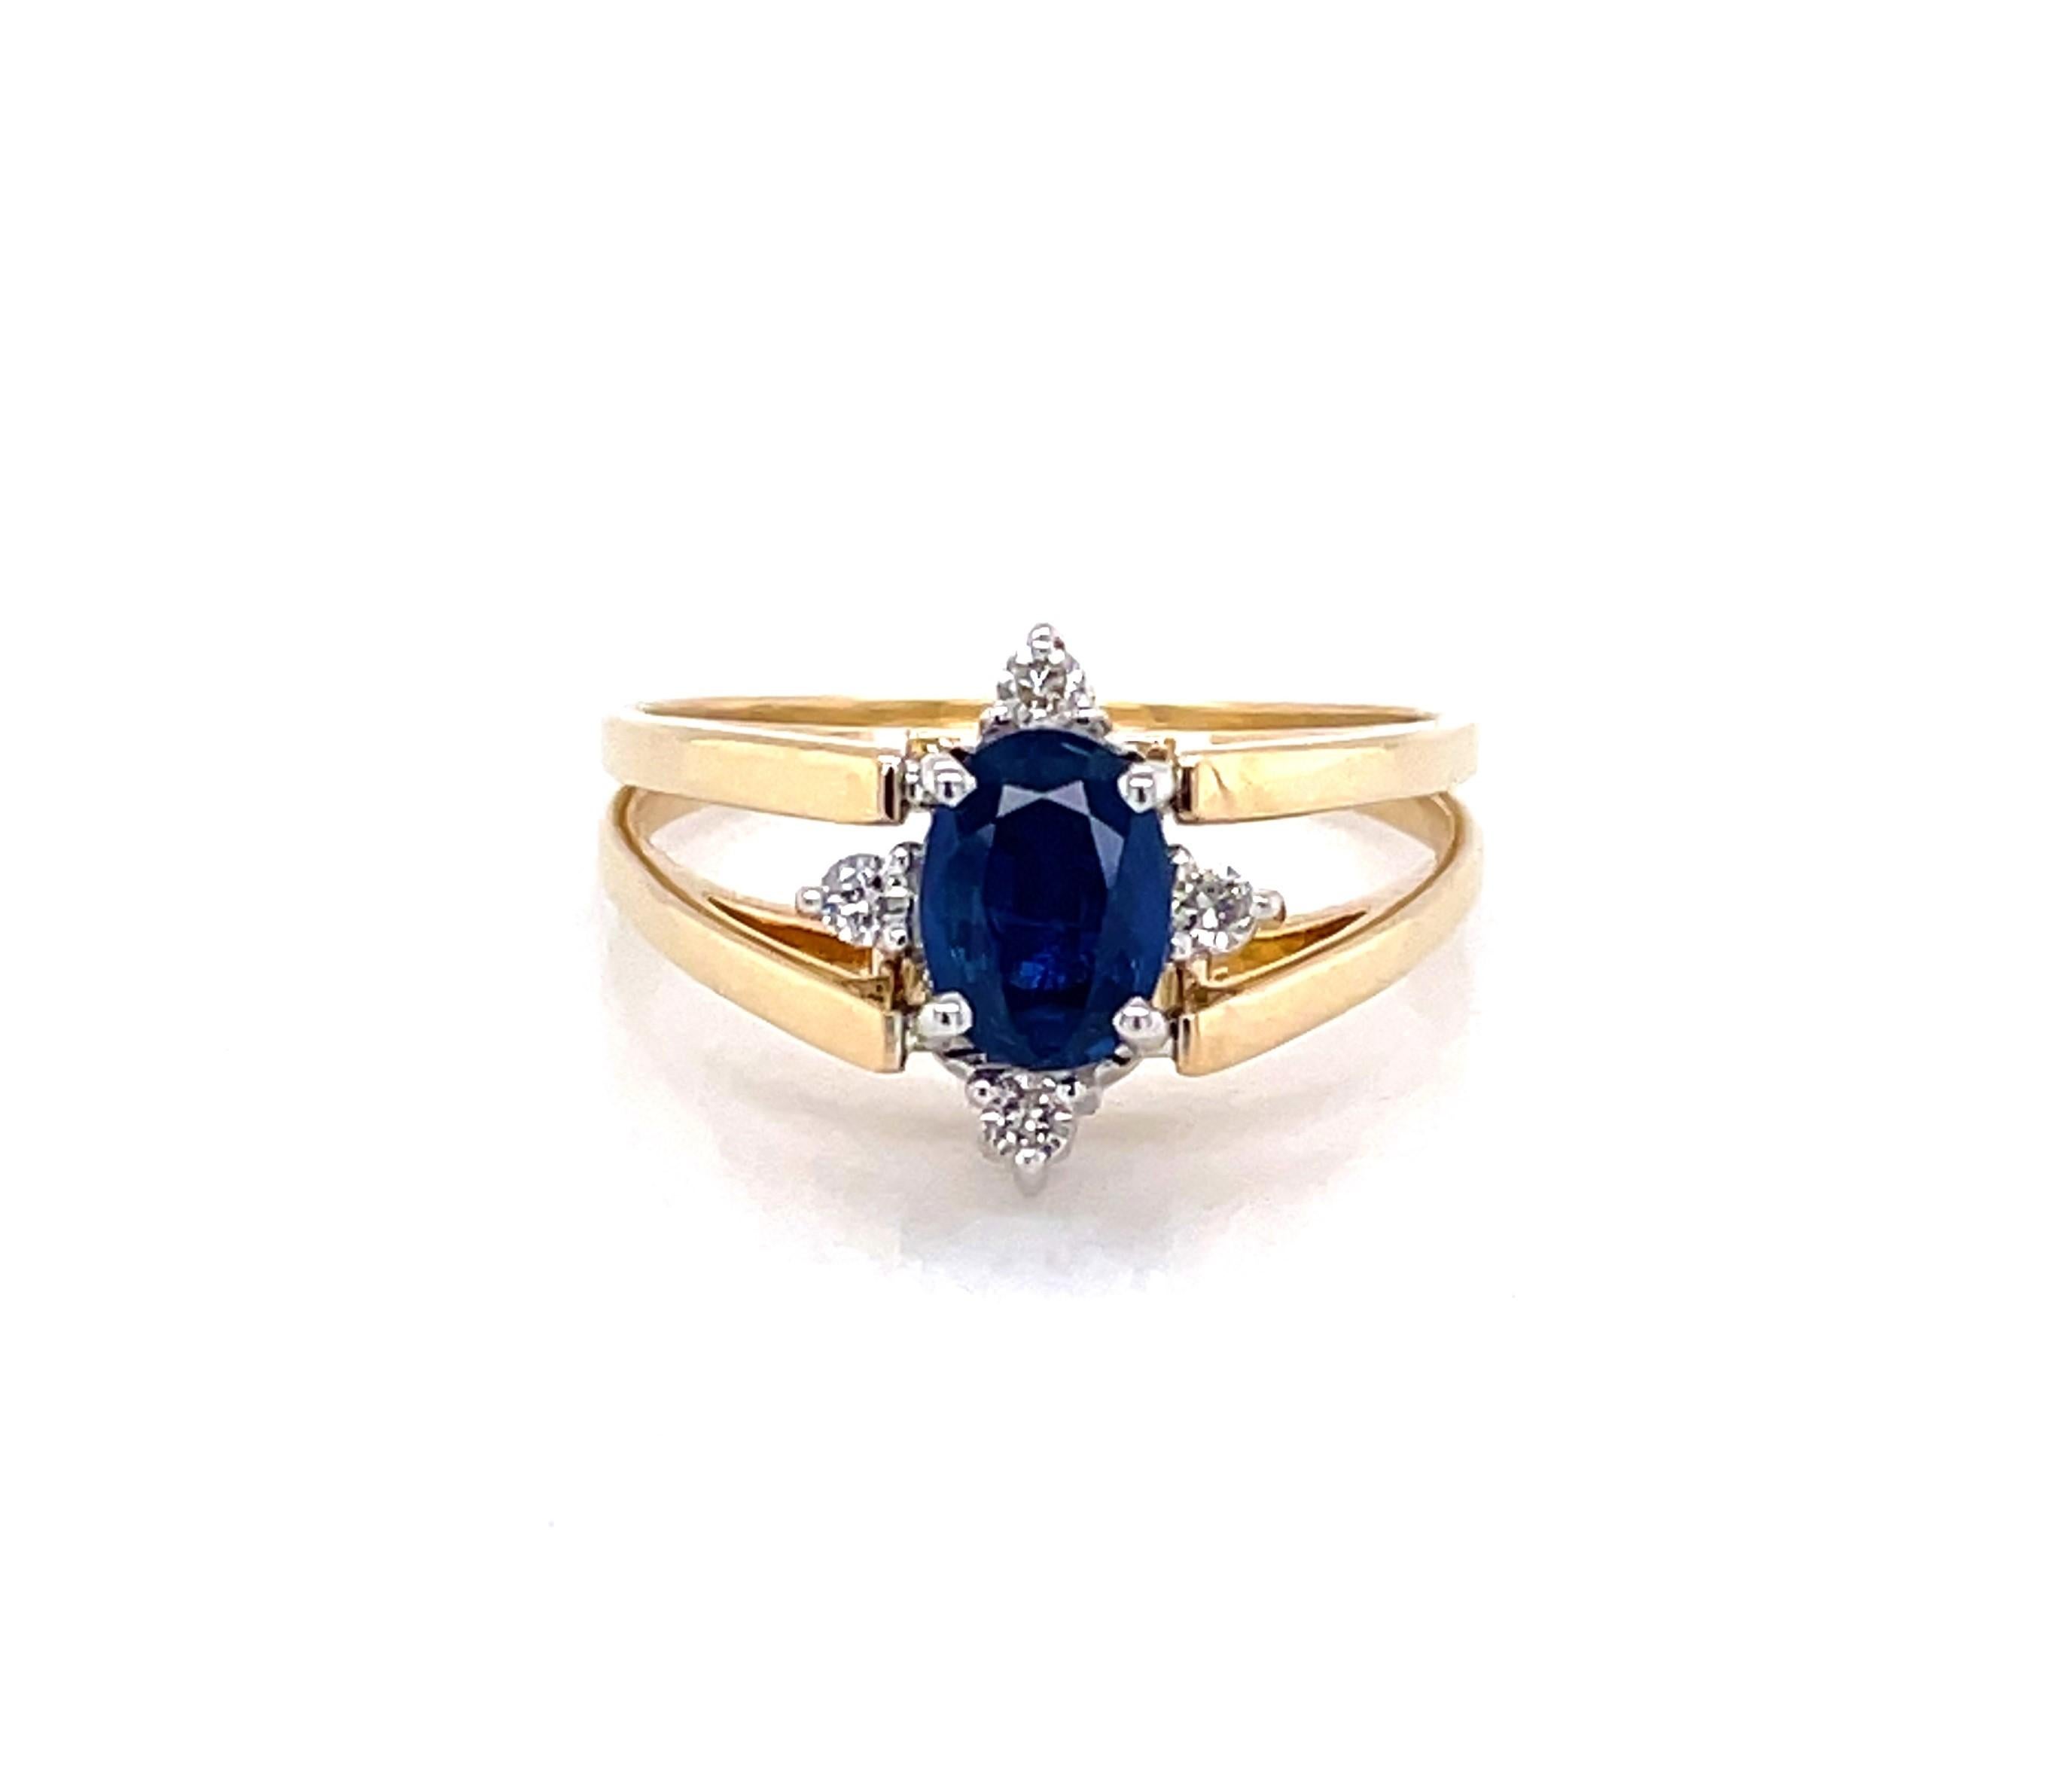 Vivid blue sapphire or a sparkling white cluster of diamonds, it's your choice. This fabulous flip ring presents both looks on demand. Offering a .75 carat (6.5 x 4mm) oval faceted sapphire accented with four round diamonds and on the reverse flip,